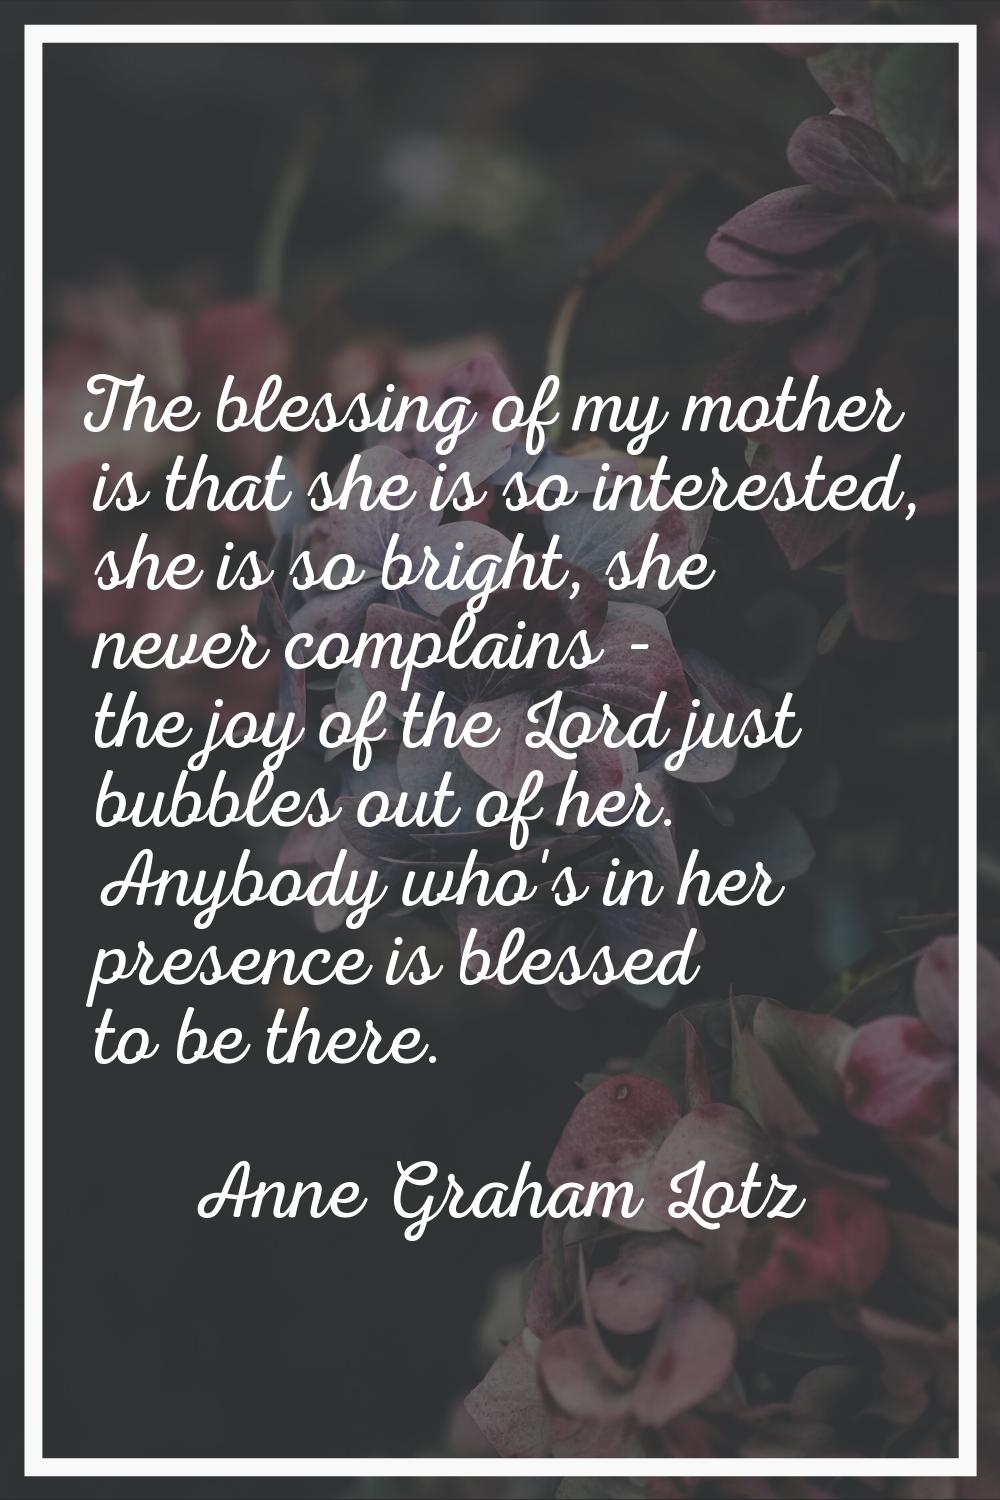 The blessing of my mother is that she is so interested, she is so bright, she never complains - the